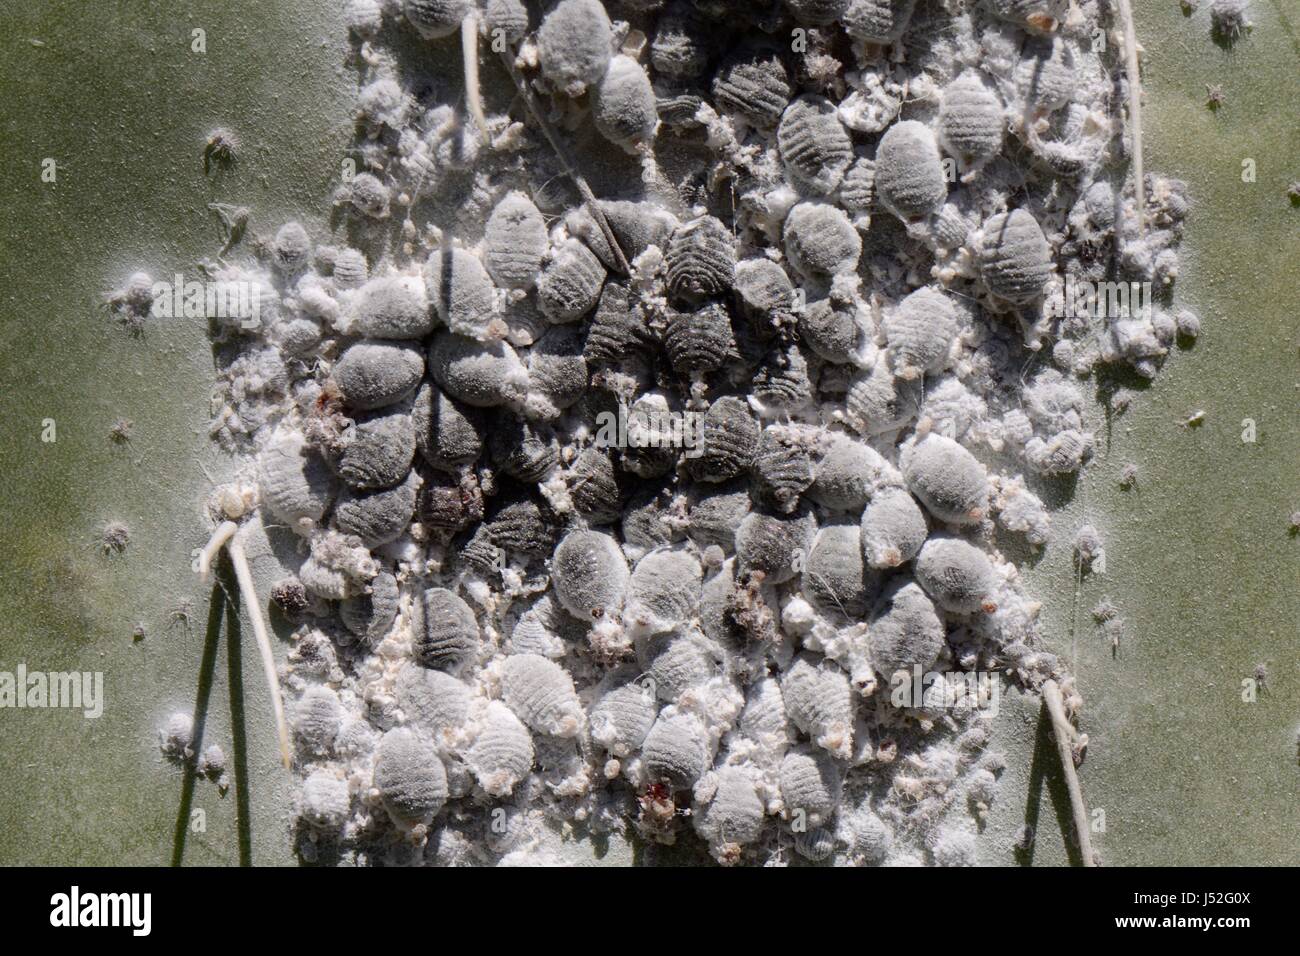 Cochineal insect (Dactylopius coccus), dense colony of scale insects from which cochineal red dye  is extracted, on Prickly pear cactus, Gran Canaria. Stock Photo